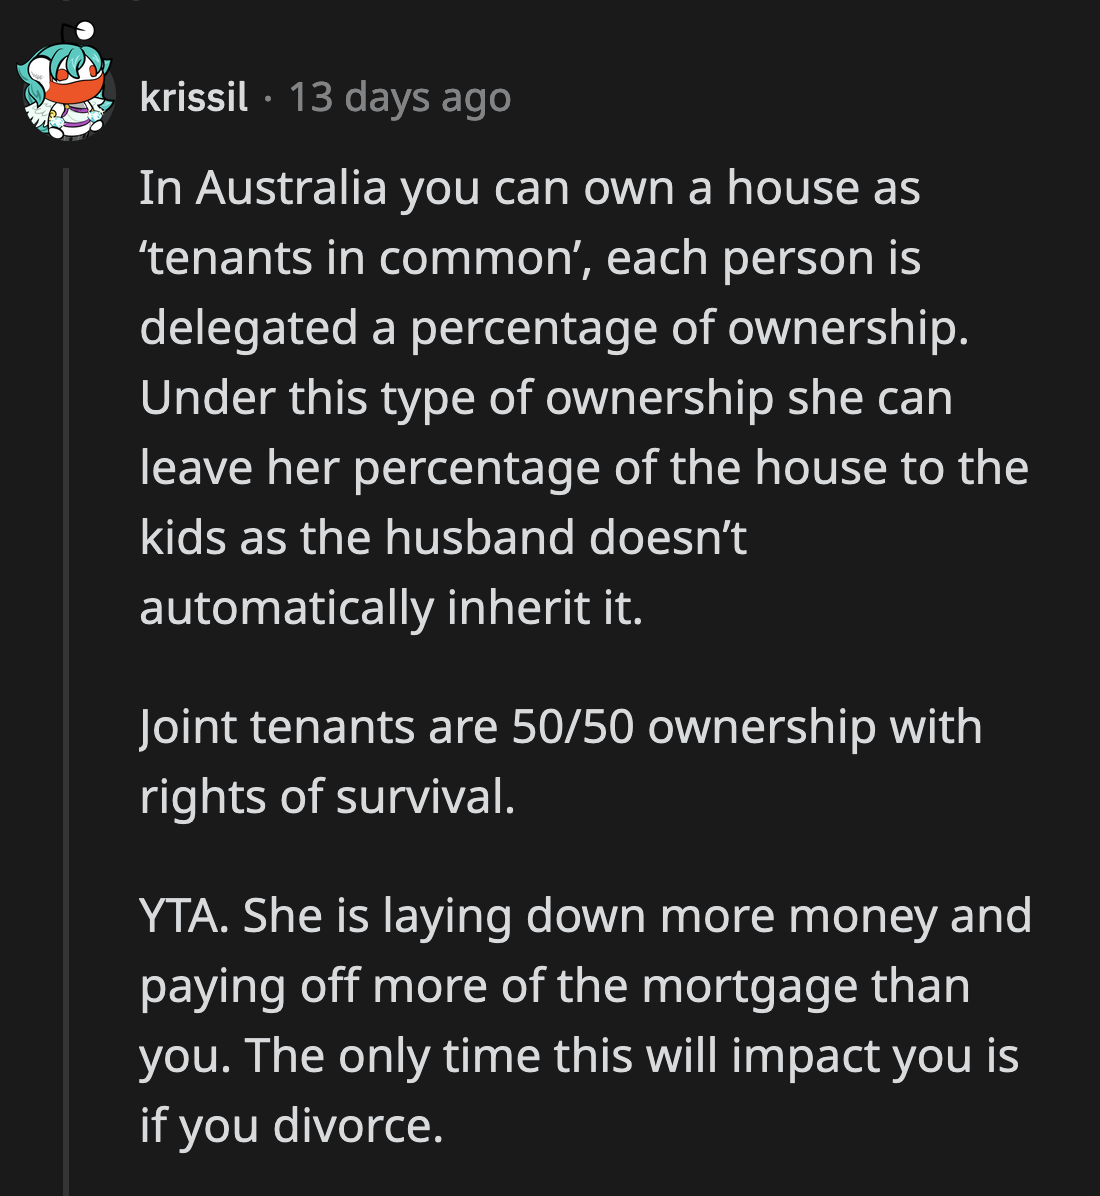 Another Redditor said OP's wife could and should delegate an appropriate percentage of ownership in their future house since she would be contributing significantly more than him.